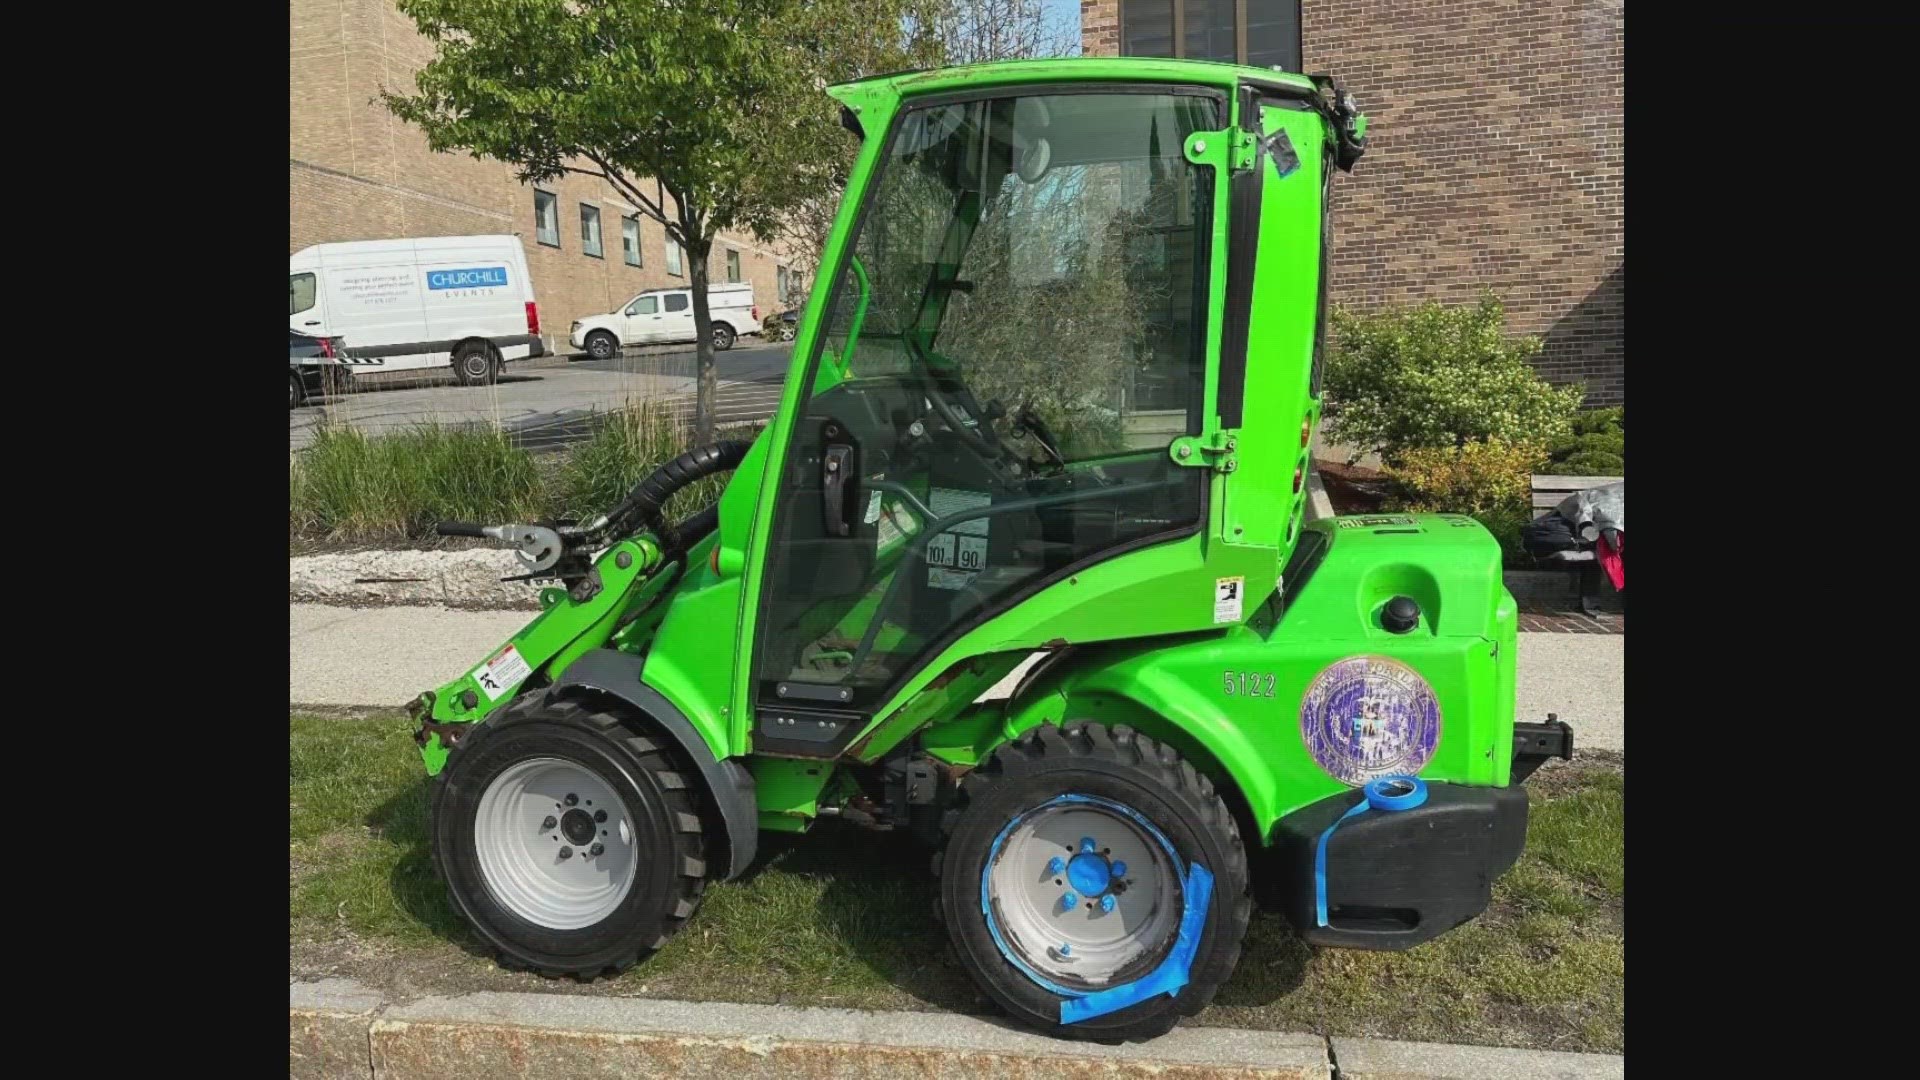 The bright green vehicle is used by the nonprofit when the weather is good to keep the streets clean.